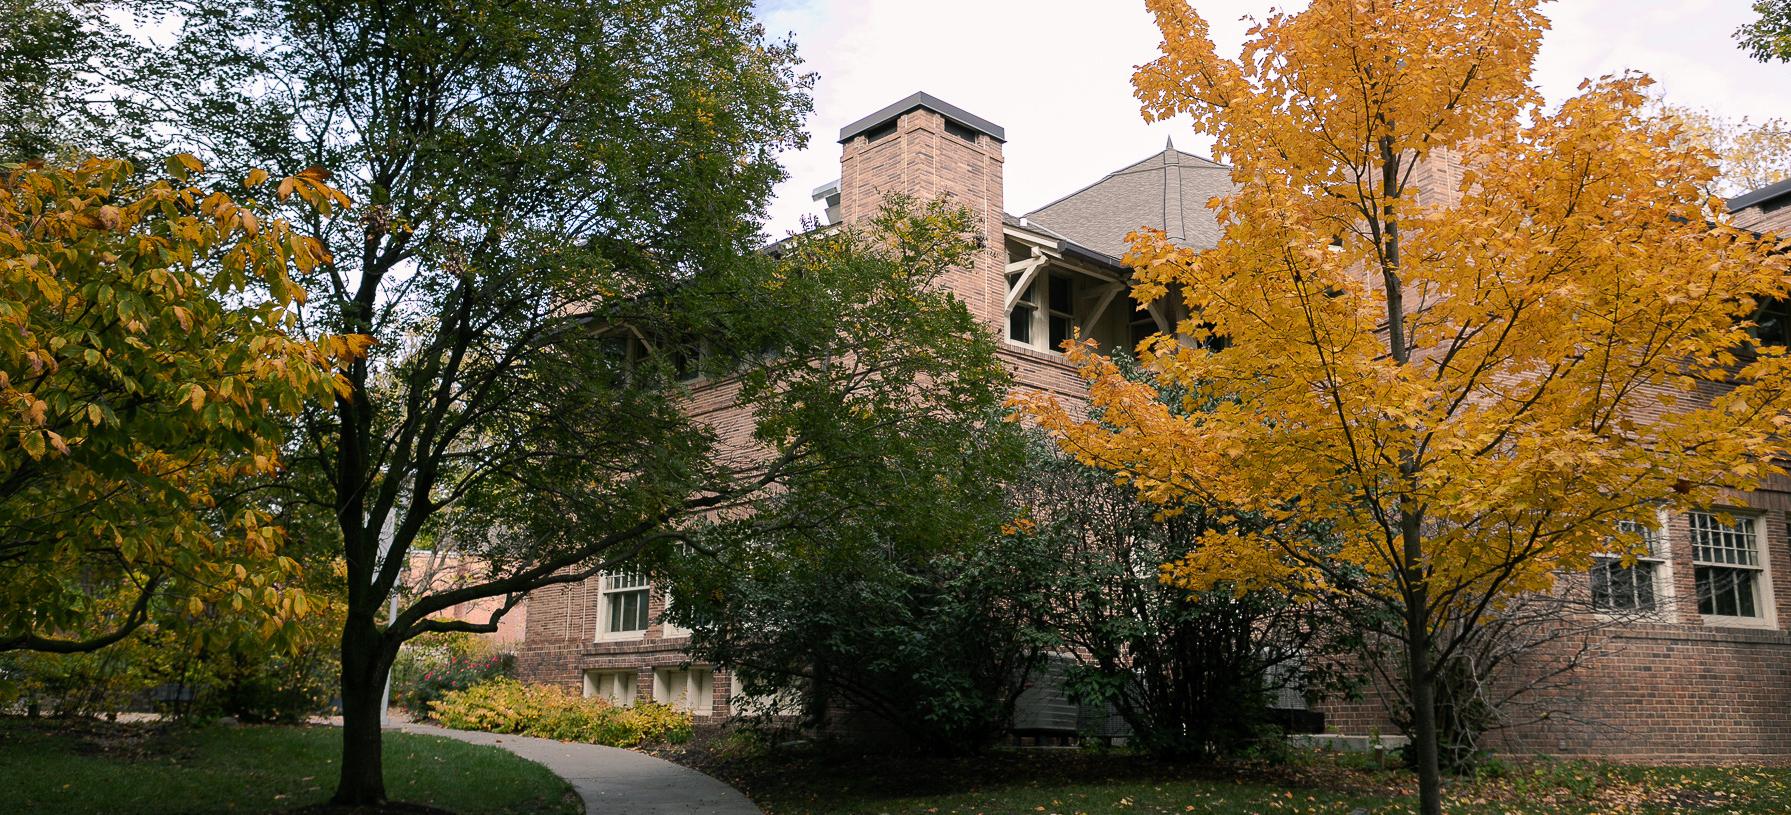 Building on 克里特岛 Campus in the Fall